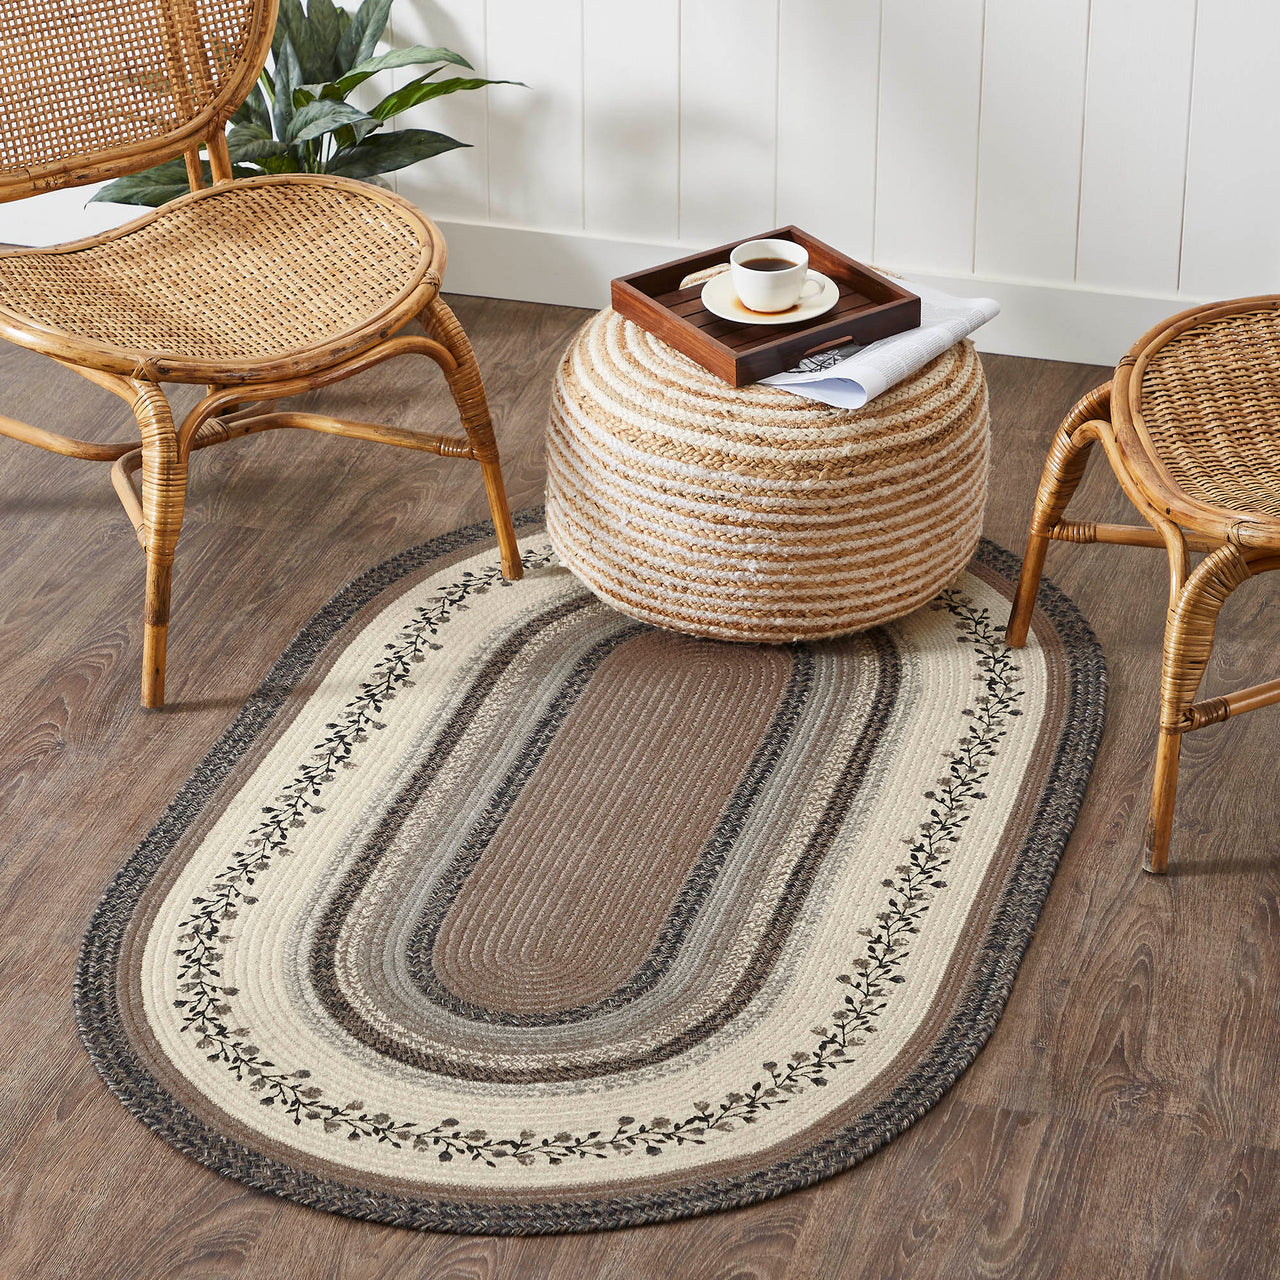 Floral Vine Jute Oval Braided Rug 3'x5' (36"x60") VHC Brands